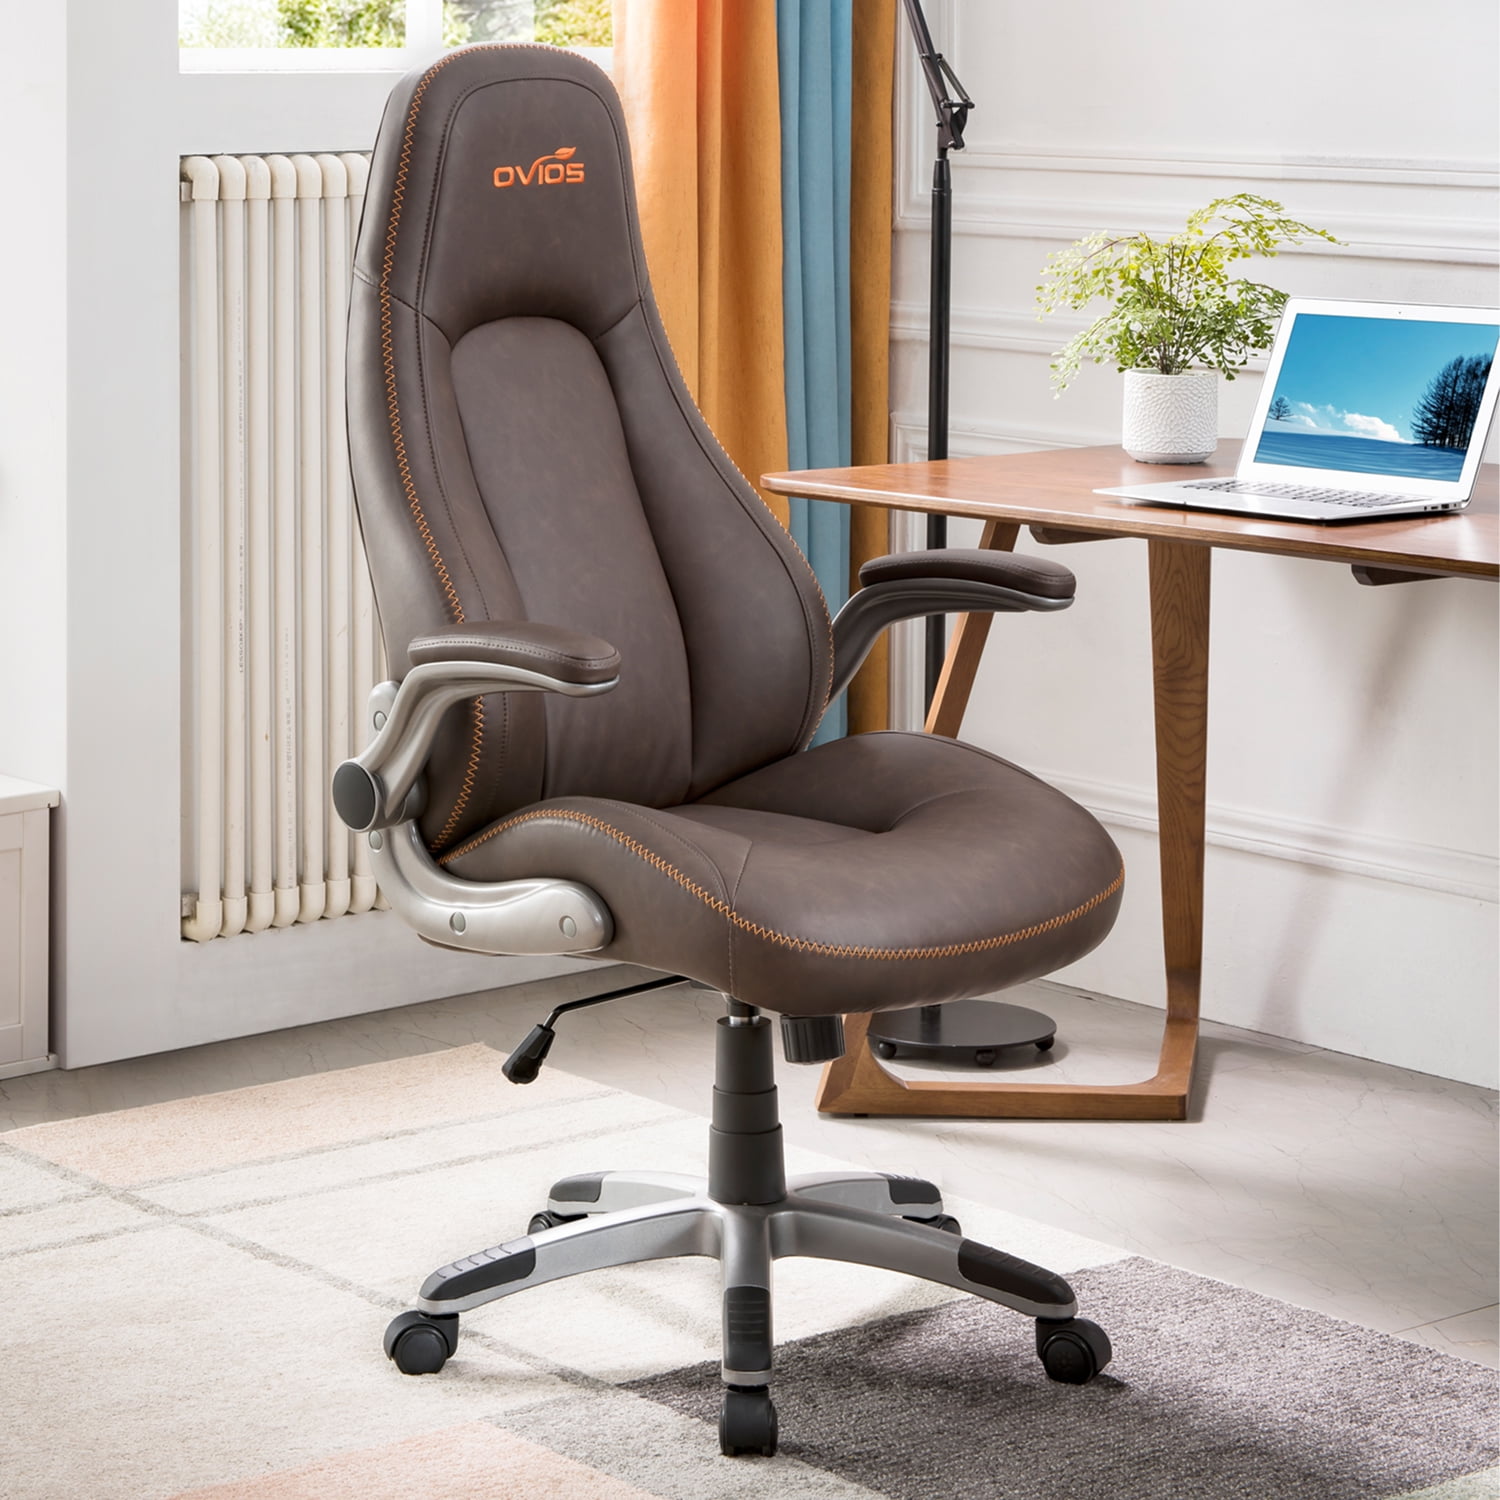 Comfortable Modern Office Chair 10 Stylish And Comfy Office Chairs ...